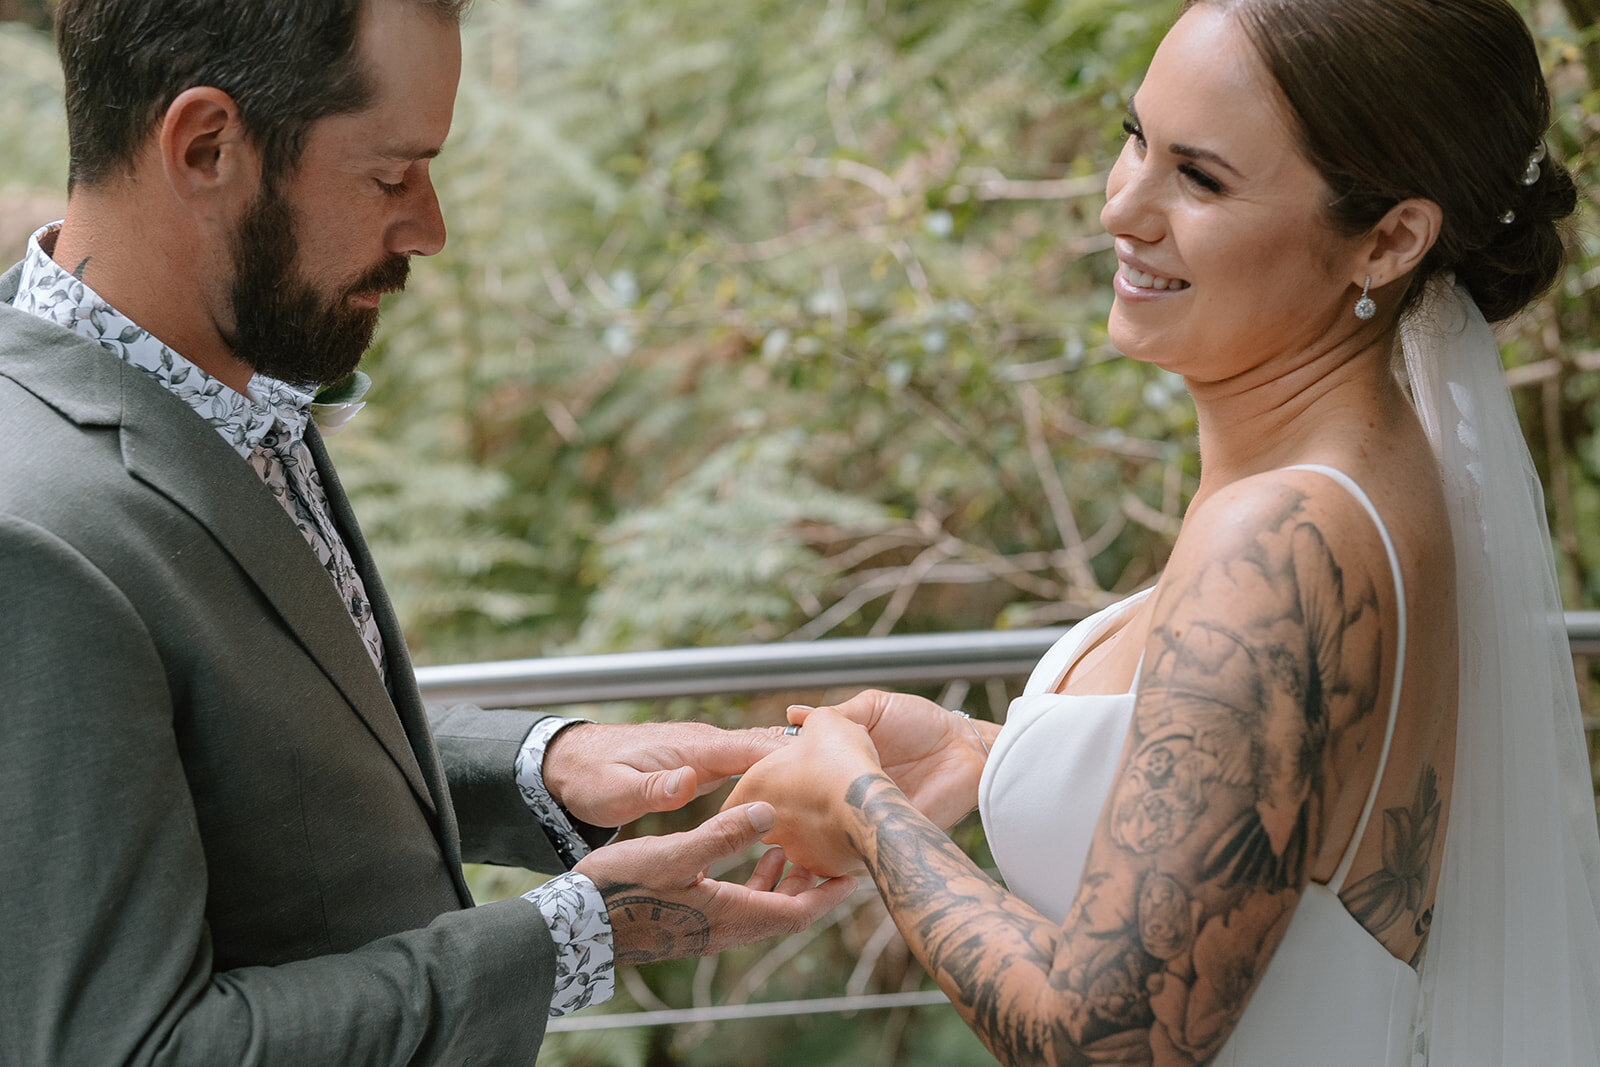 Stacey&Cory-Coast&Pines-152